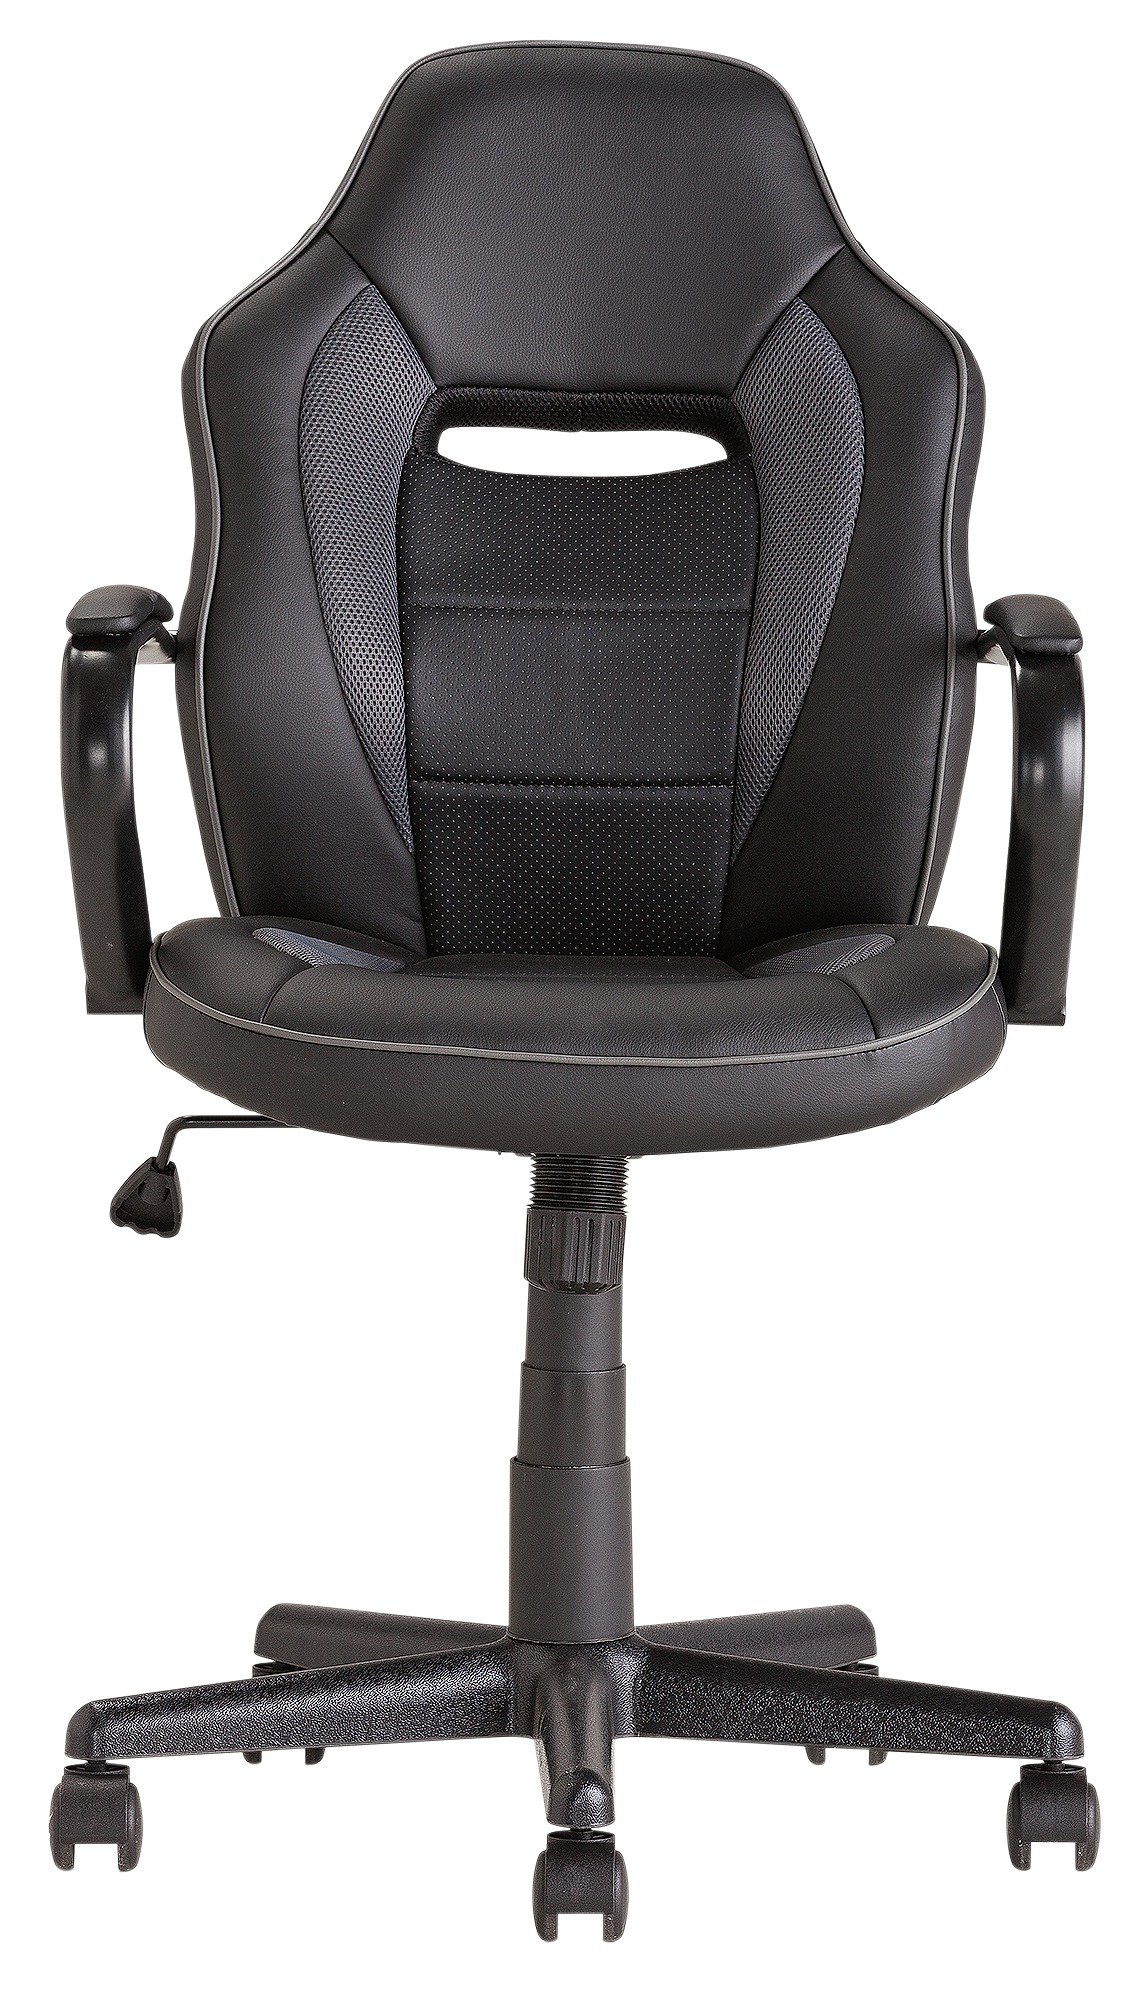 Buy Argos Home Mid Back Office Gaming Chair - Black | Gaming chairs | Argos